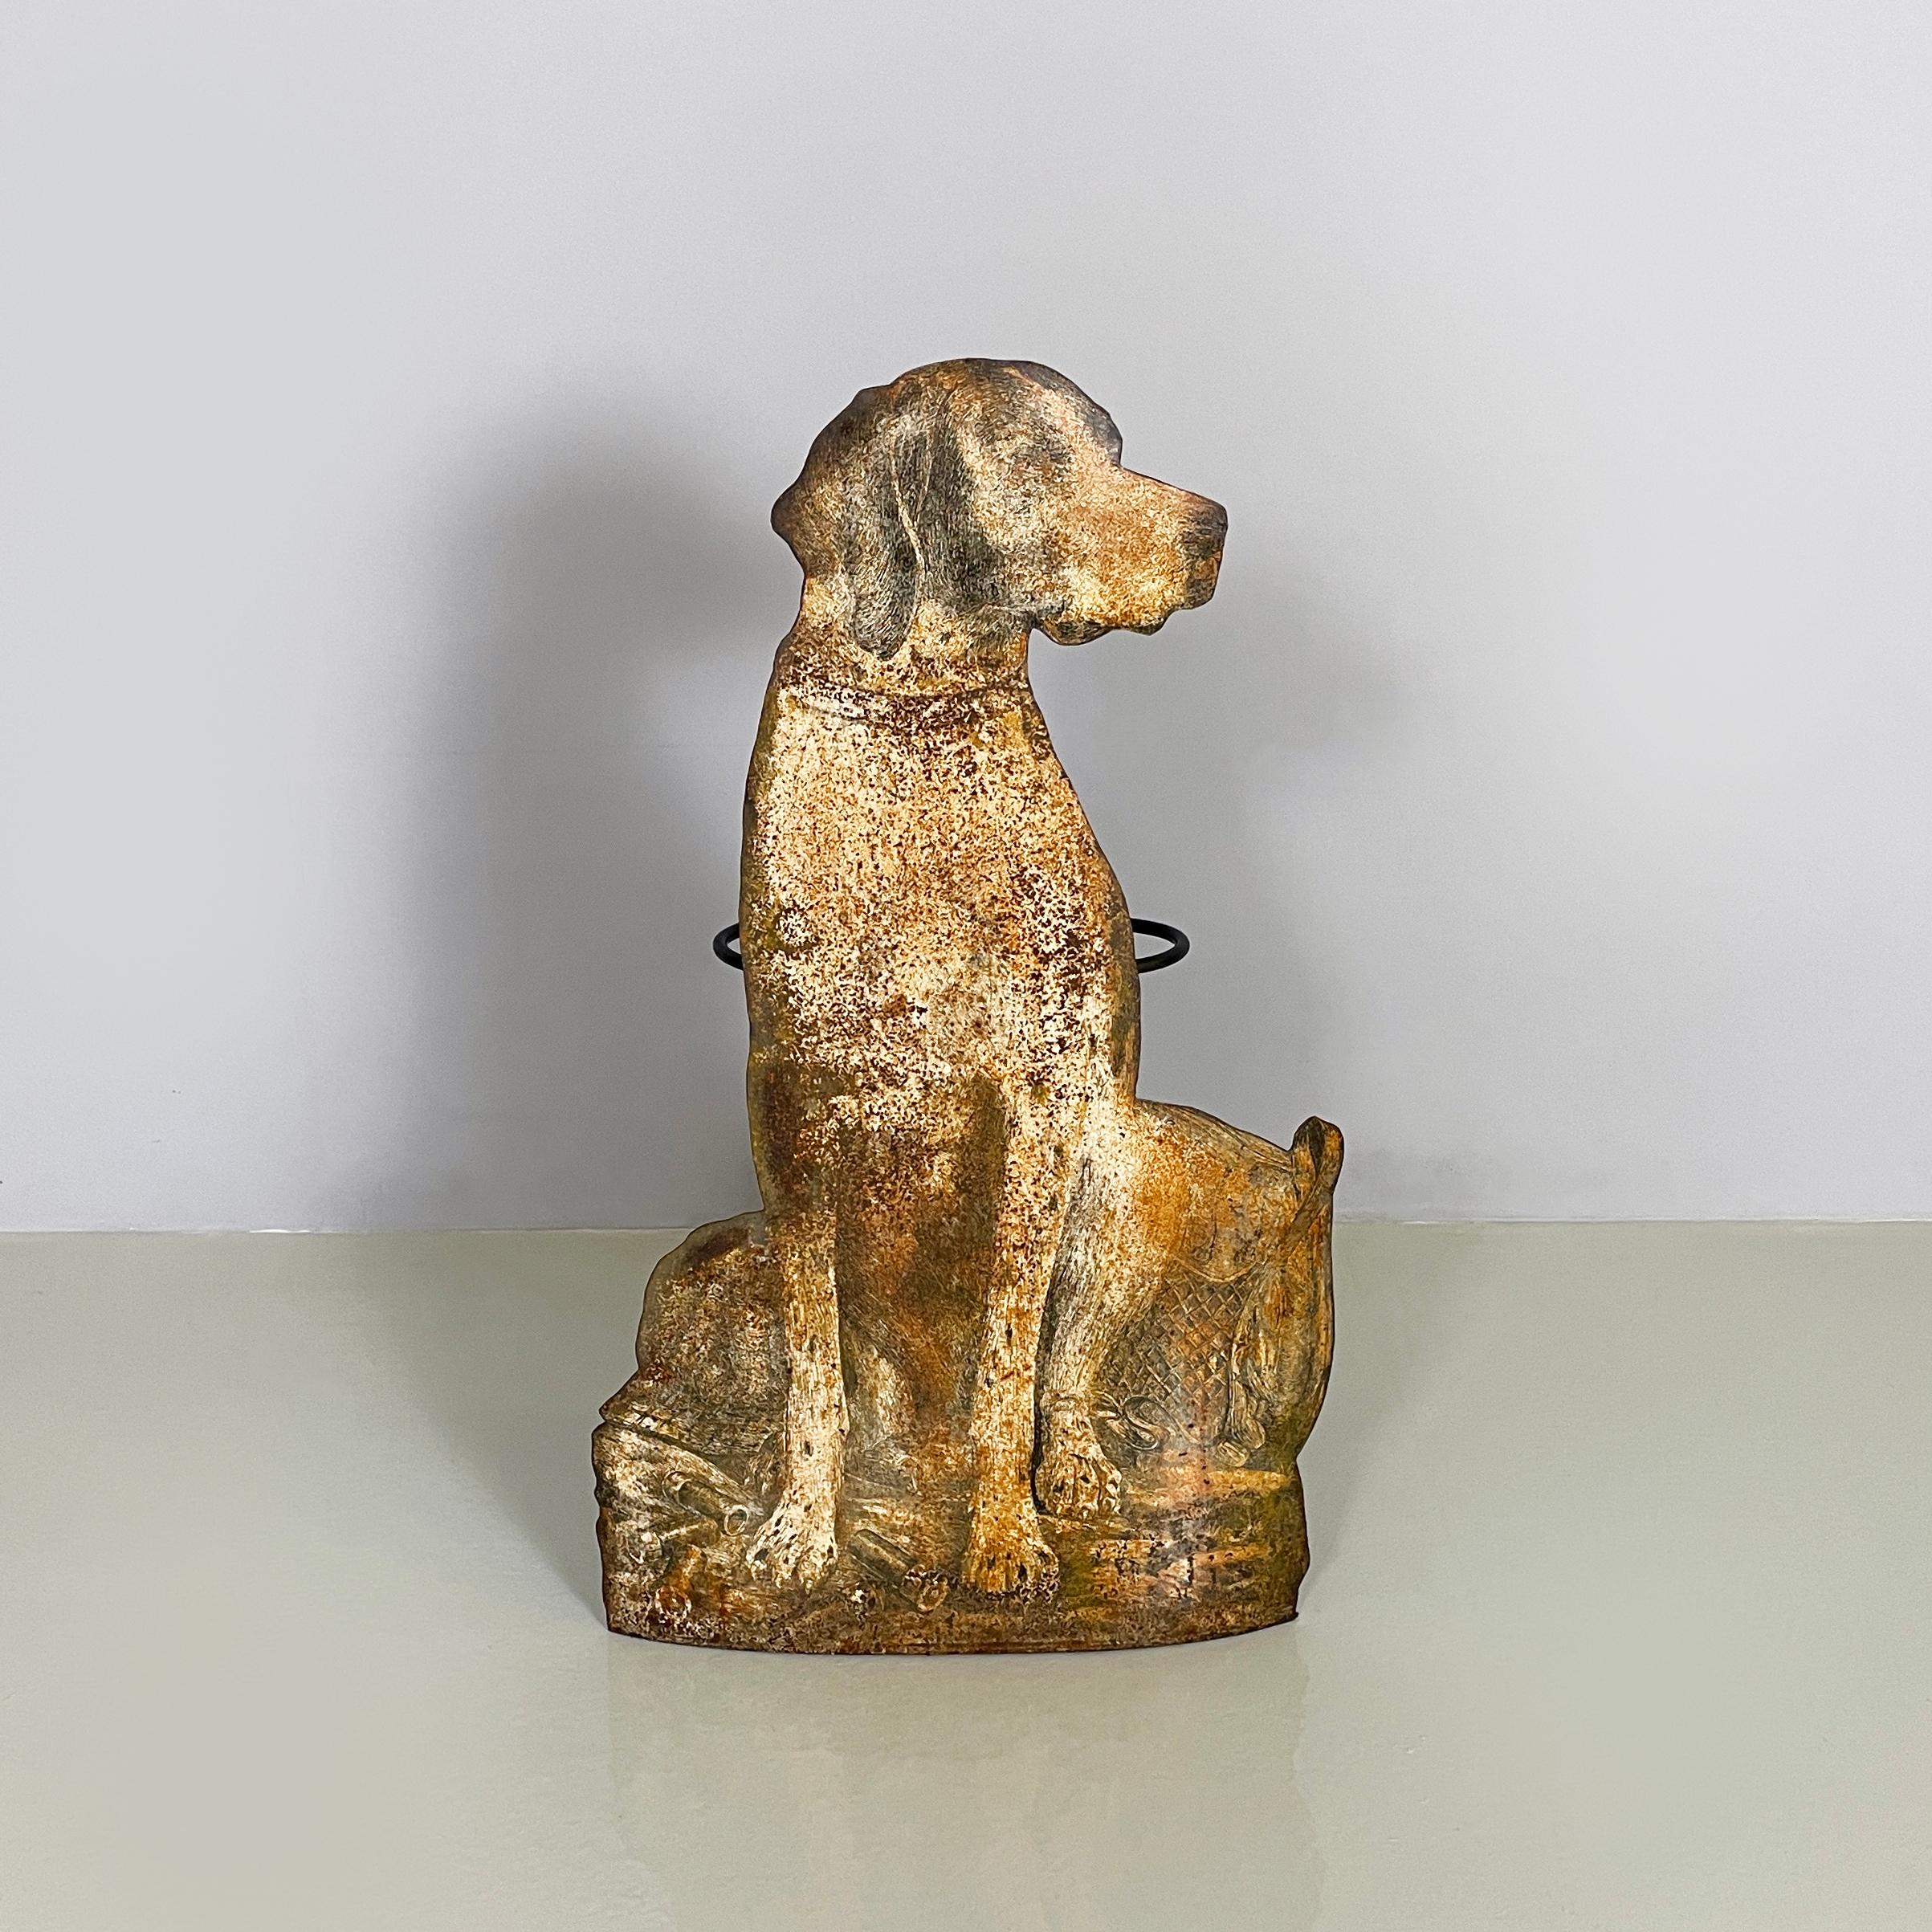 Italian mid-century modern Umbrella stand with dog by Fornasetti, 1950s
Metal umbrella stand. On the front there is a shaped and painted metal sheet: the subject is a dog sitting on a drapery with small objects scattered around. On the back there is